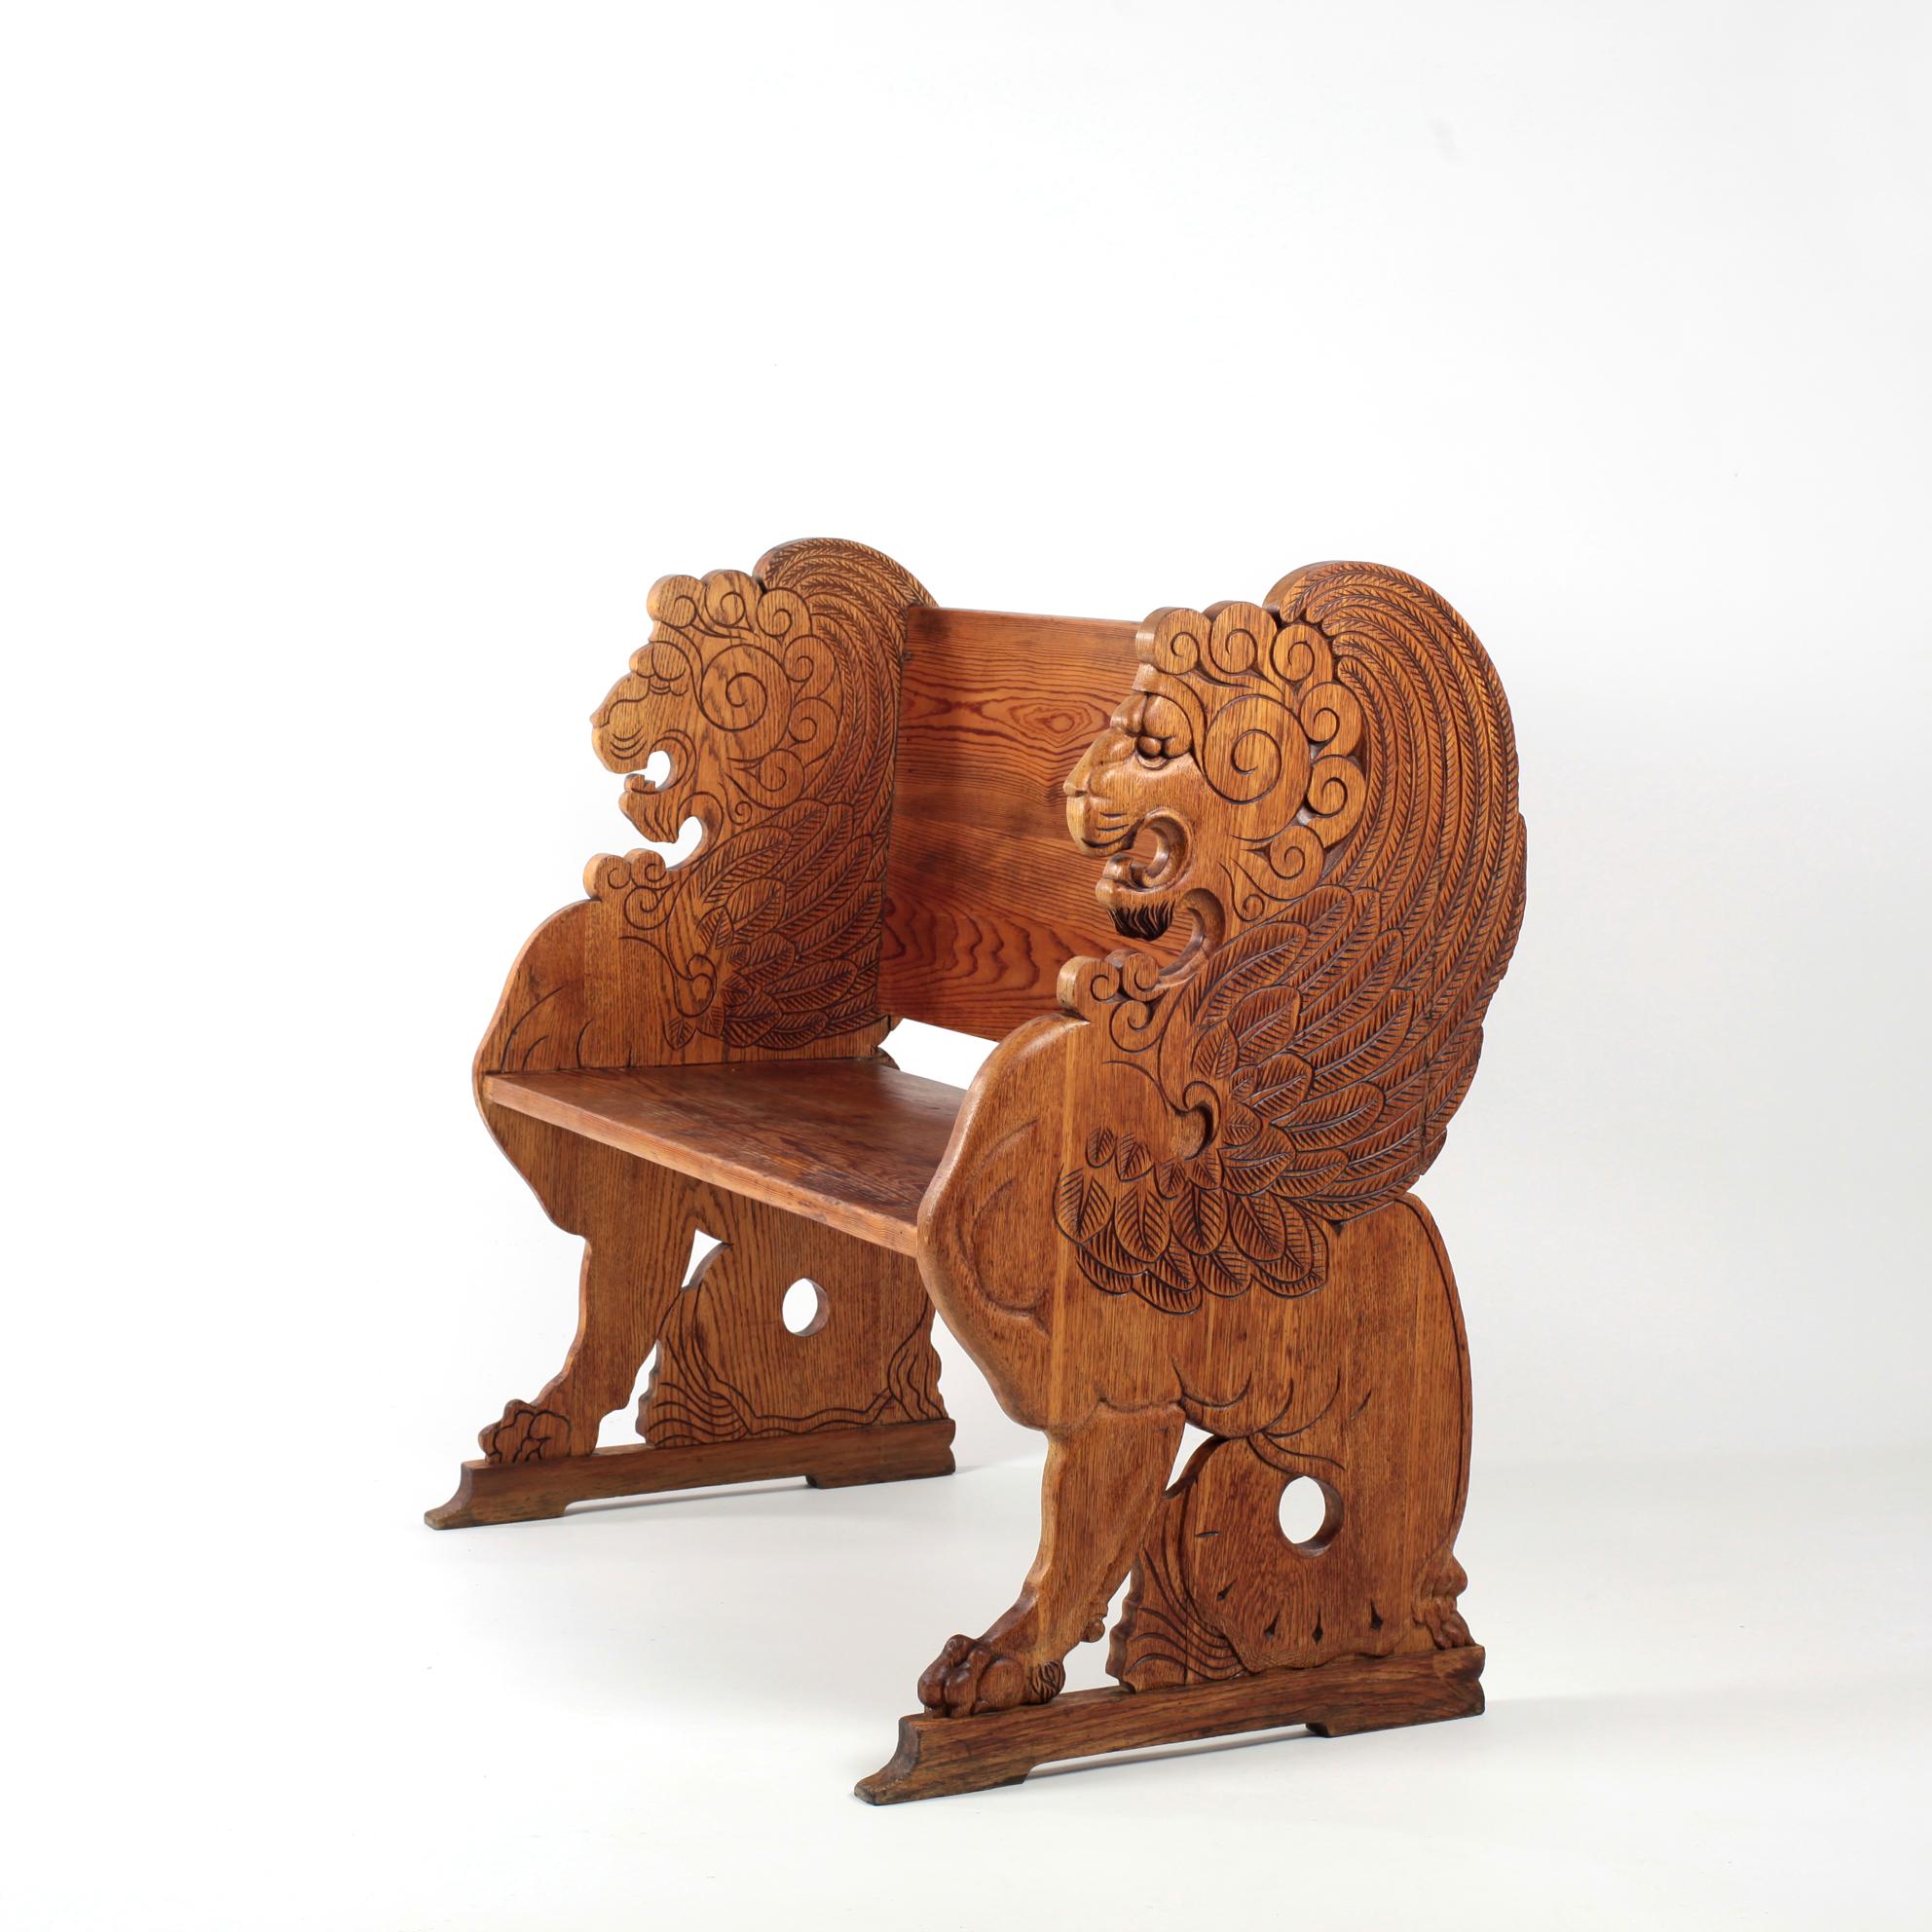 Stunning bench from the beginning of the 20th century in carved wood whose sides represent a lion. Made in Sweden, handmade in solid oak and pine with an incredible patina. Very nice presence for a very decorative piece.